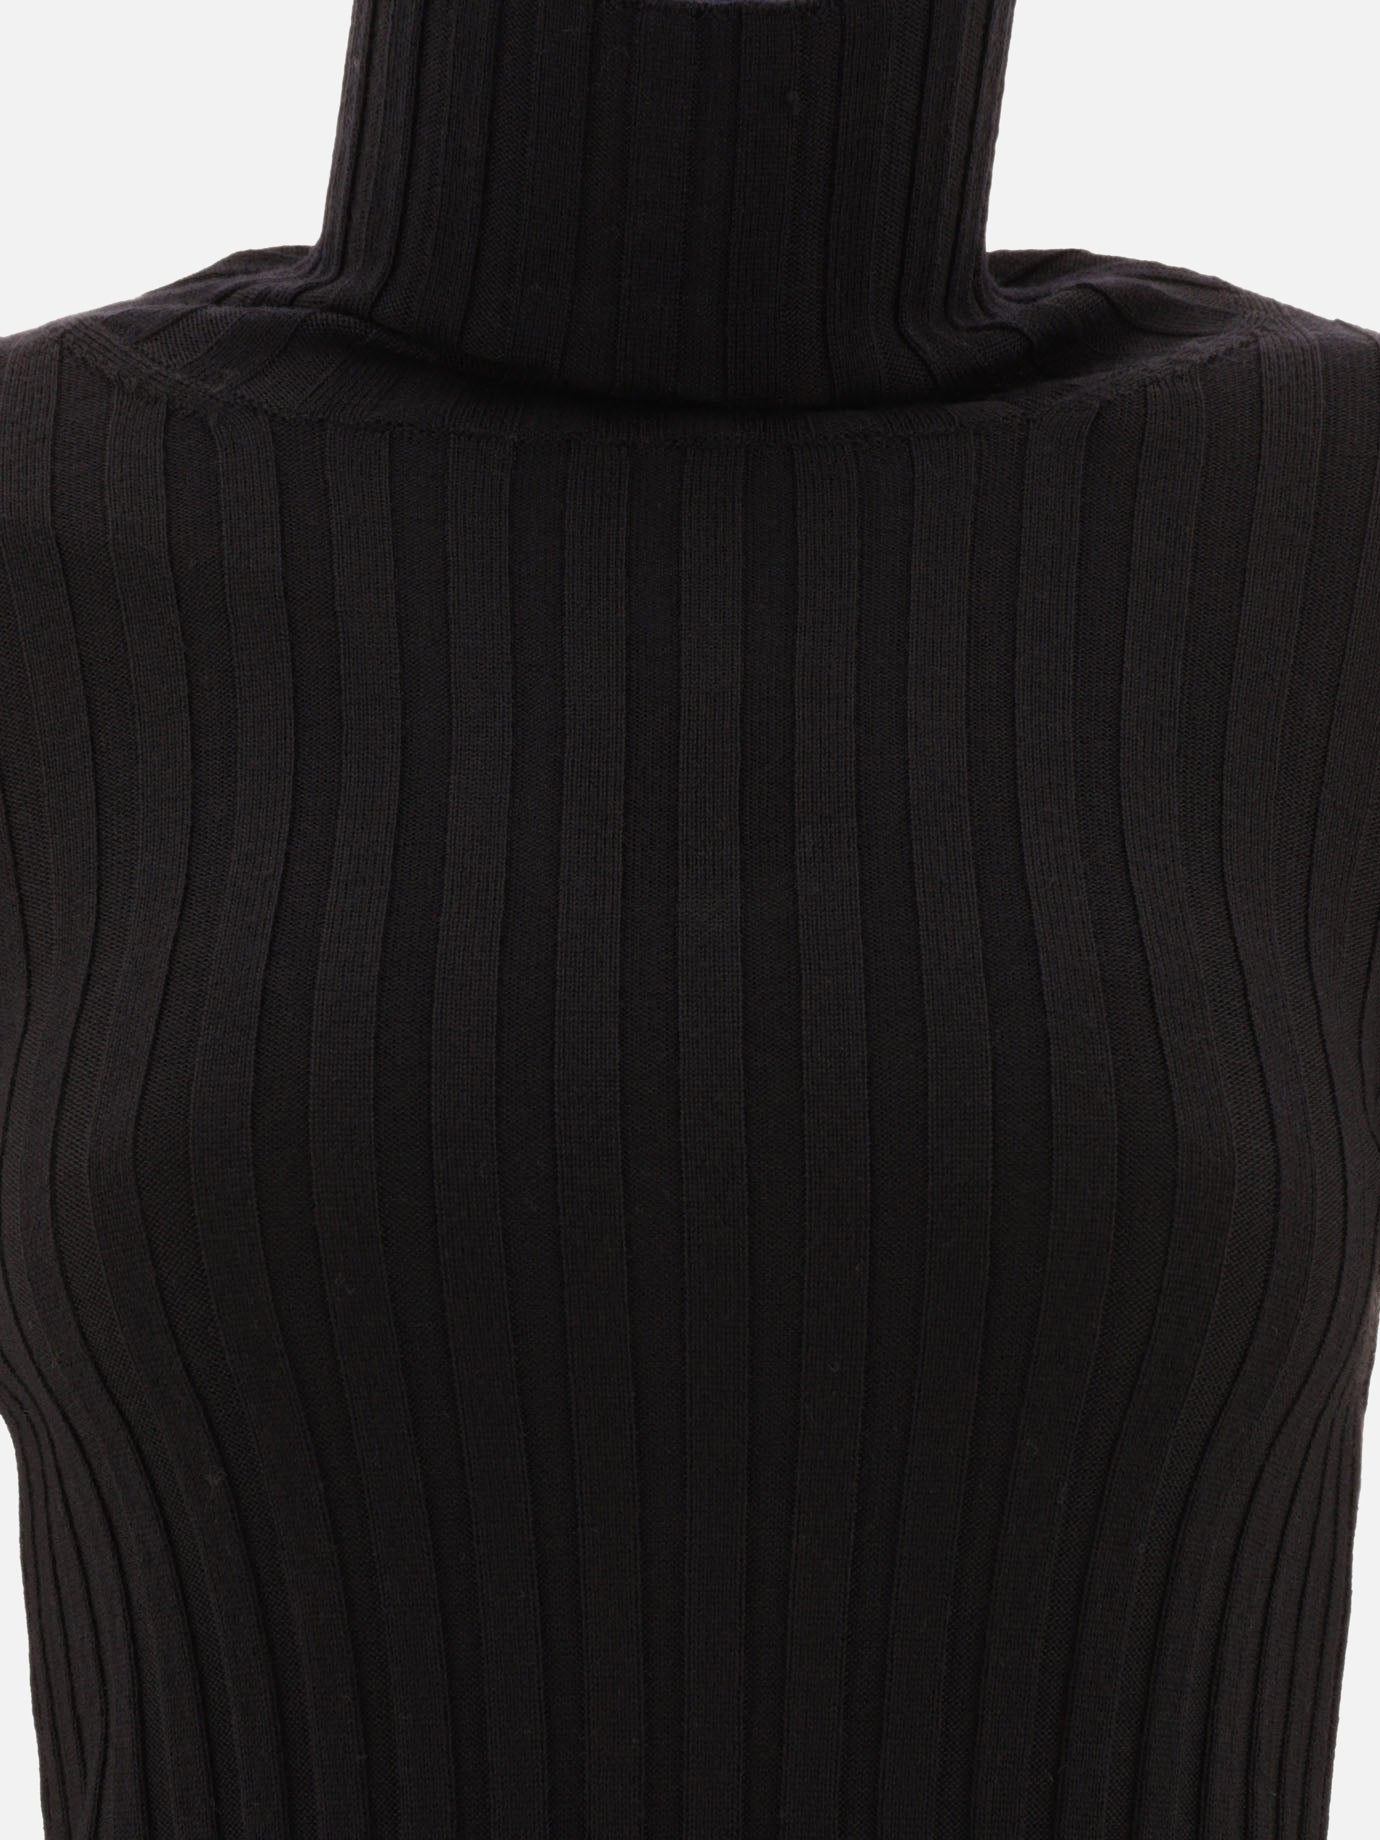 Turtleneck with contrasting profiles